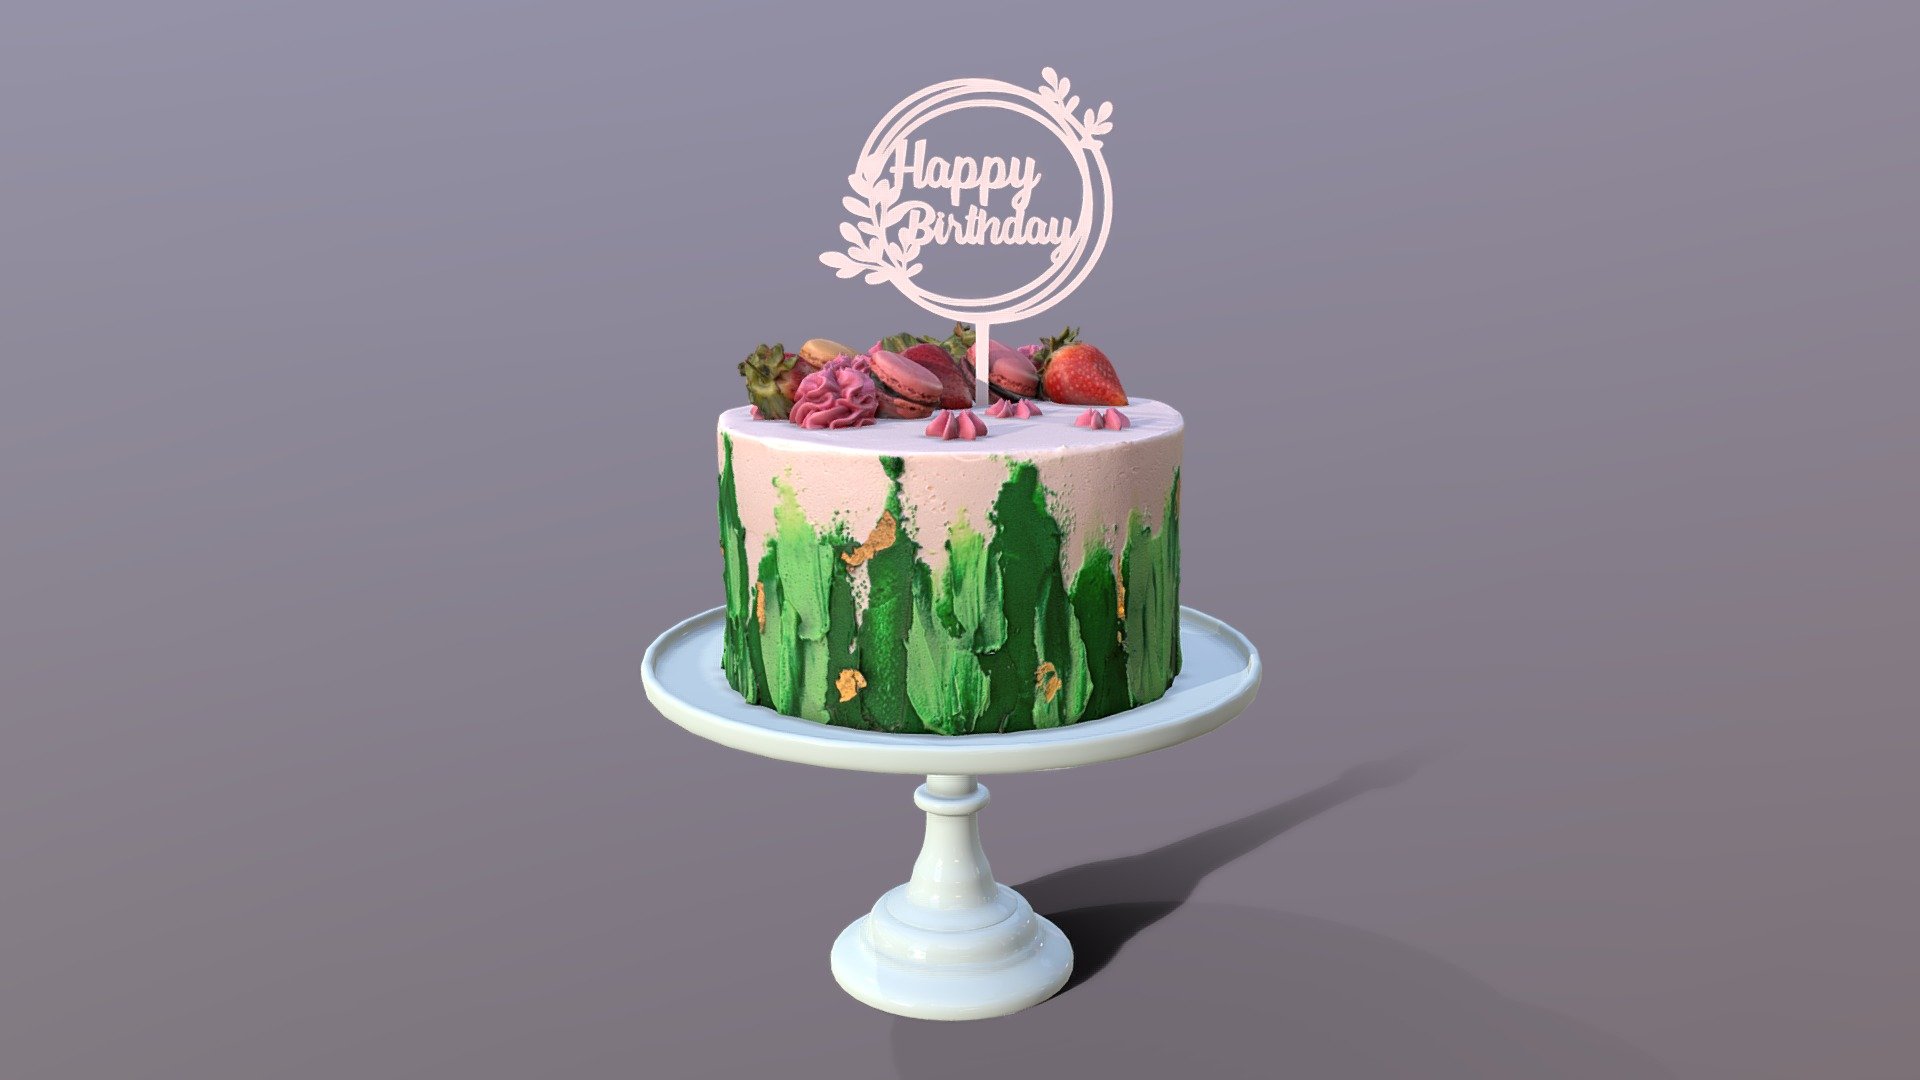 3D scan of an elegant Jade Strawberry Swirl Birthday Cake on the Mosser glass stand which is made by CAKESBURG Online Premium Cake Shop in UK. You can also order real cake from this link: https://cakesburg.co.uk/products/elegant-hibiscus-buttercream-cake?_pos=1&amp;_sid=7620101b1&amp;_ss=r

Textures 4096*4096px PBR photoscan-based materials Base Color, Normal, Roughness, Specular, AO) - Elegant Jade Strawberry Swirl Birthday Cake - Buy Royalty Free 3D model by Cakesburg Premium 3D Cake Shop (@Viscom_Cakesburg) 3d model